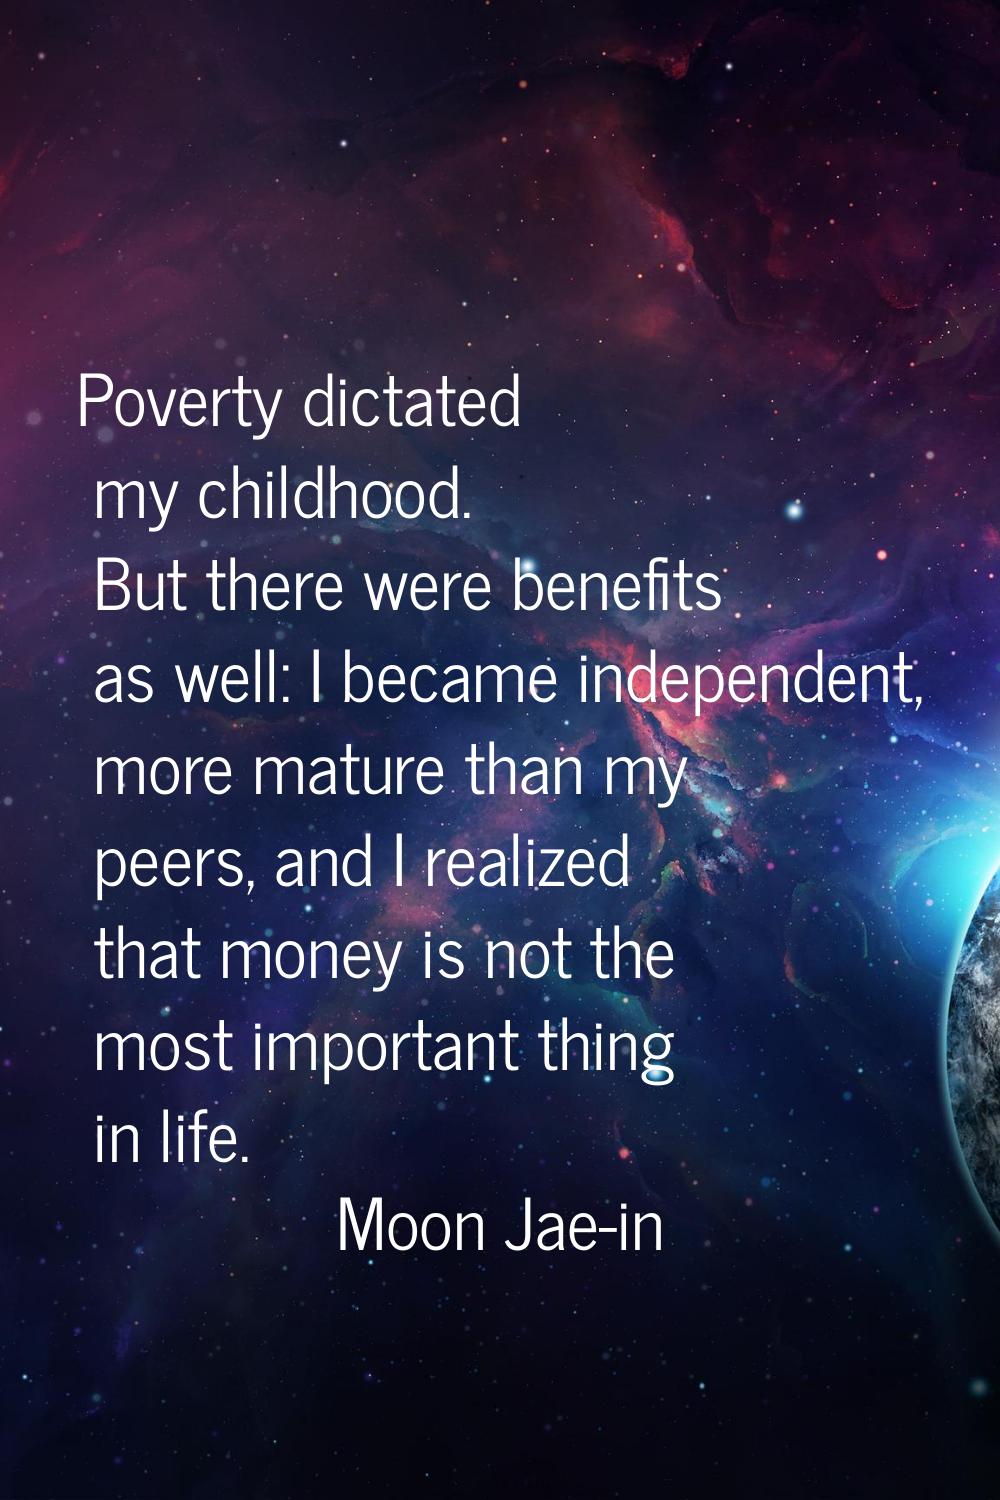 Poverty dictated my childhood. But there were benefits as well: I became independent, more mature t